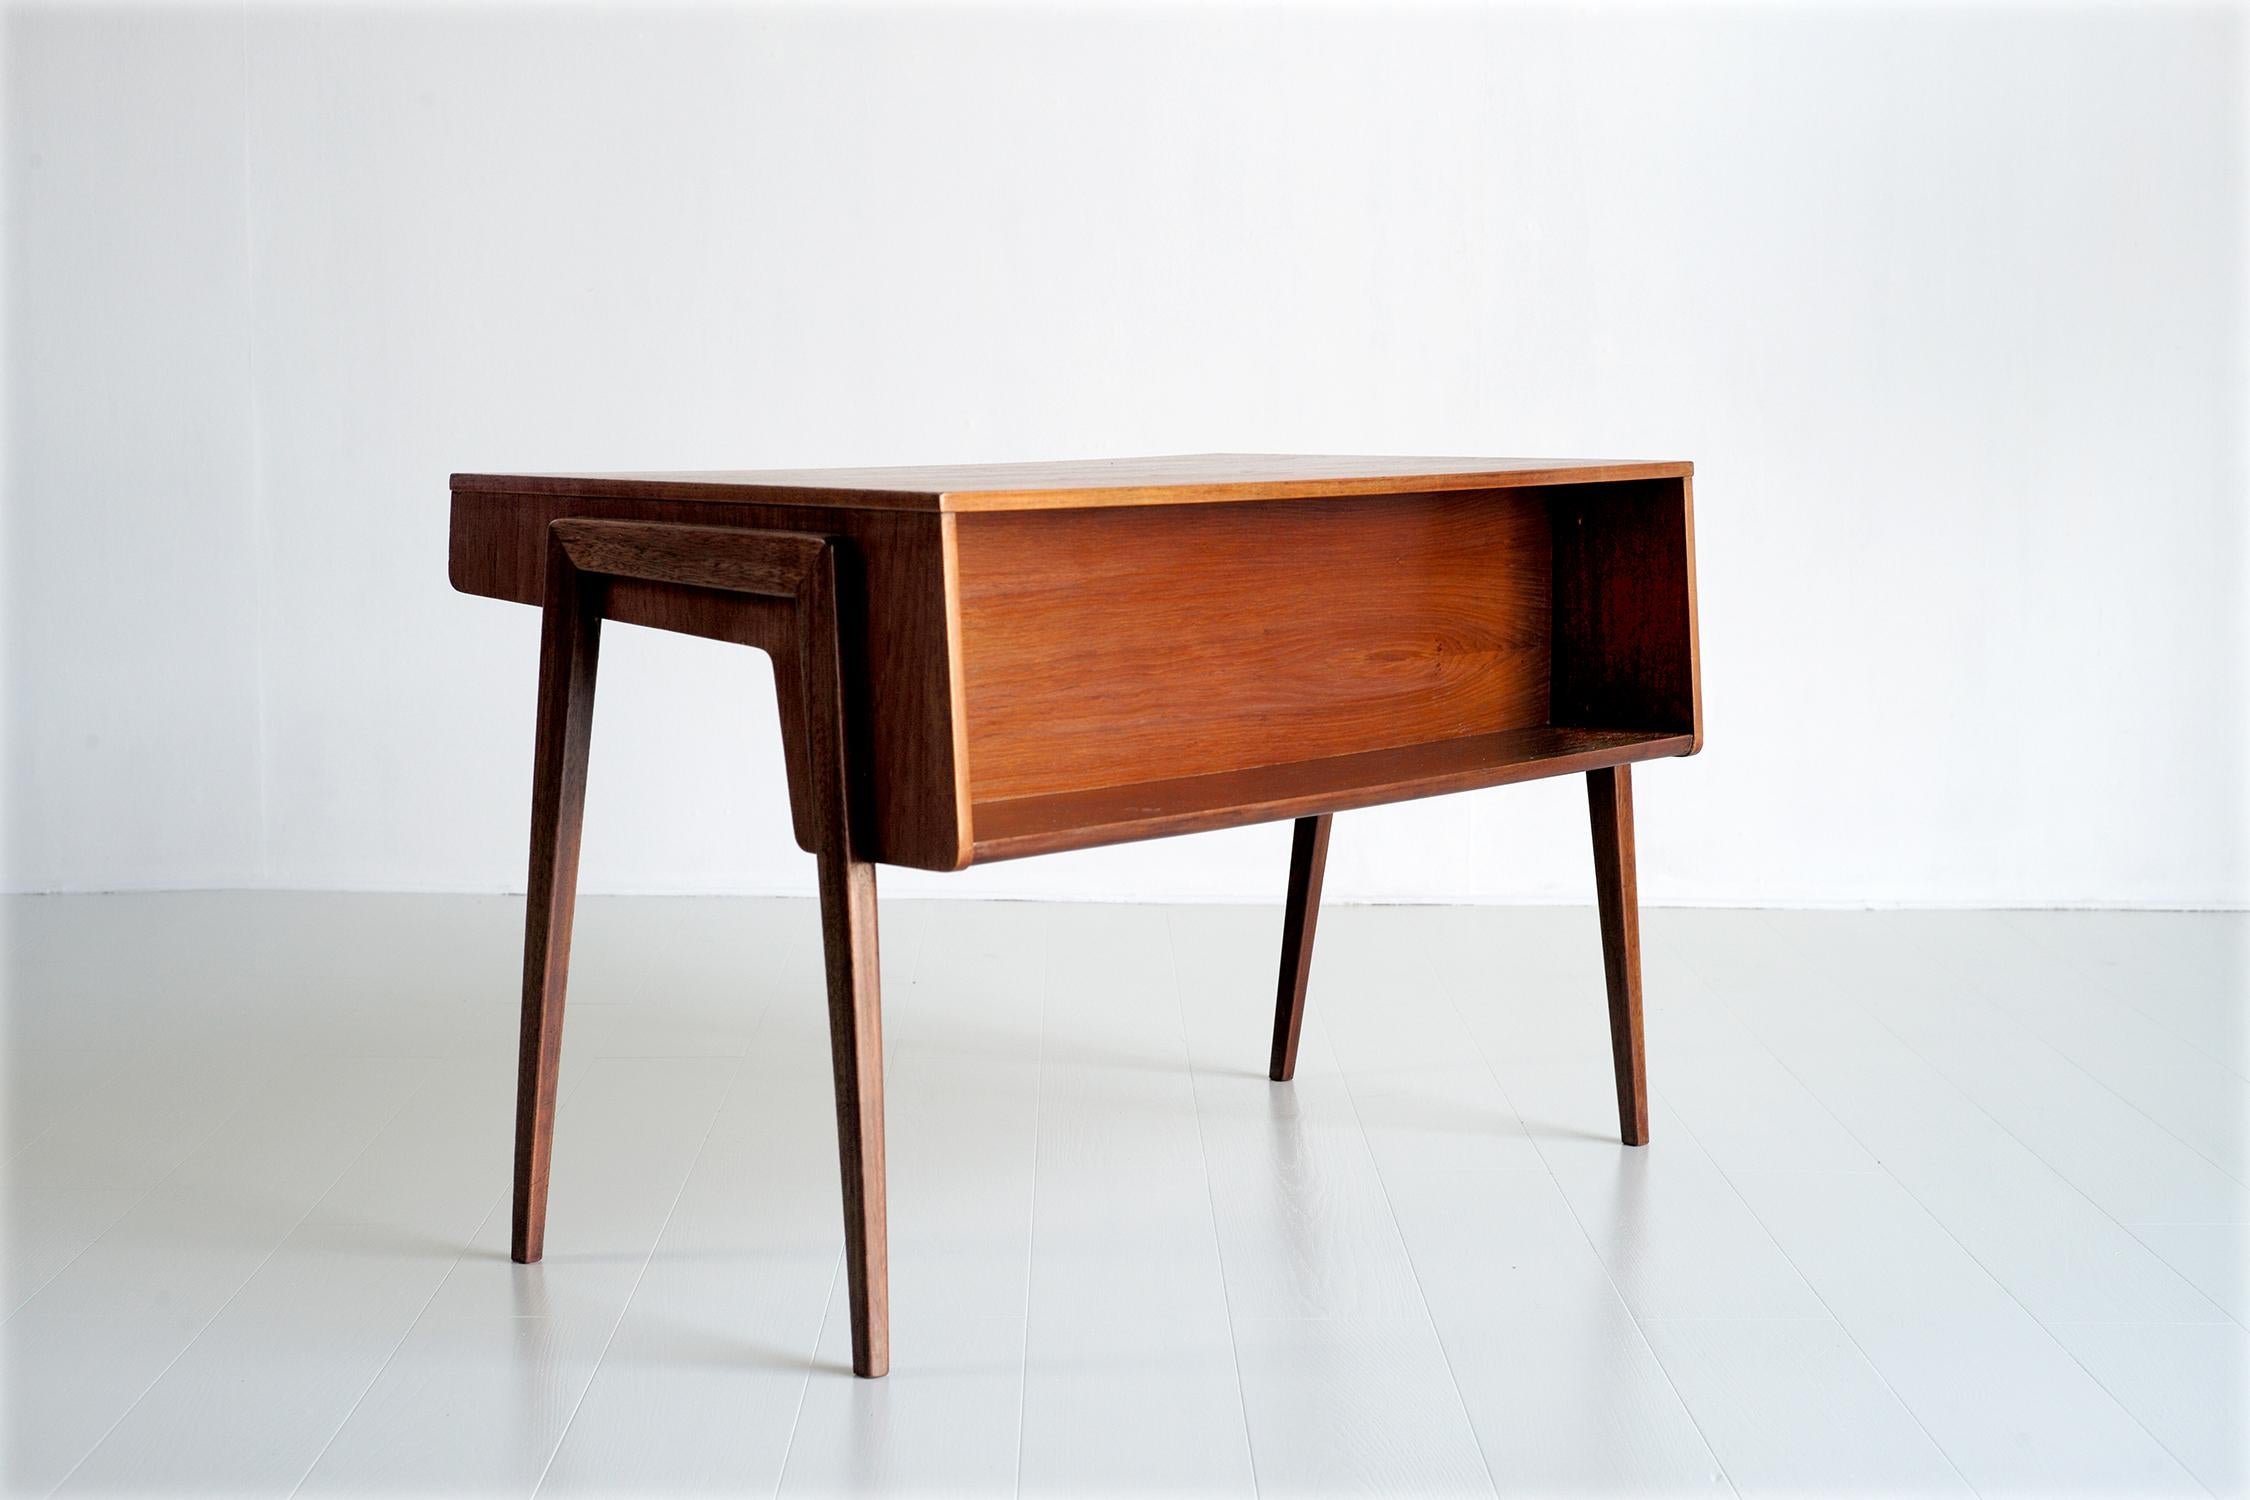 Scandinavian desk in teak and maple, 1960. Mounted on a portico base, the desk consists of a library on the visitor side and two drawers in the belt. The purity of the lines and the execution give this desk a timeless elegance. Very good condition.